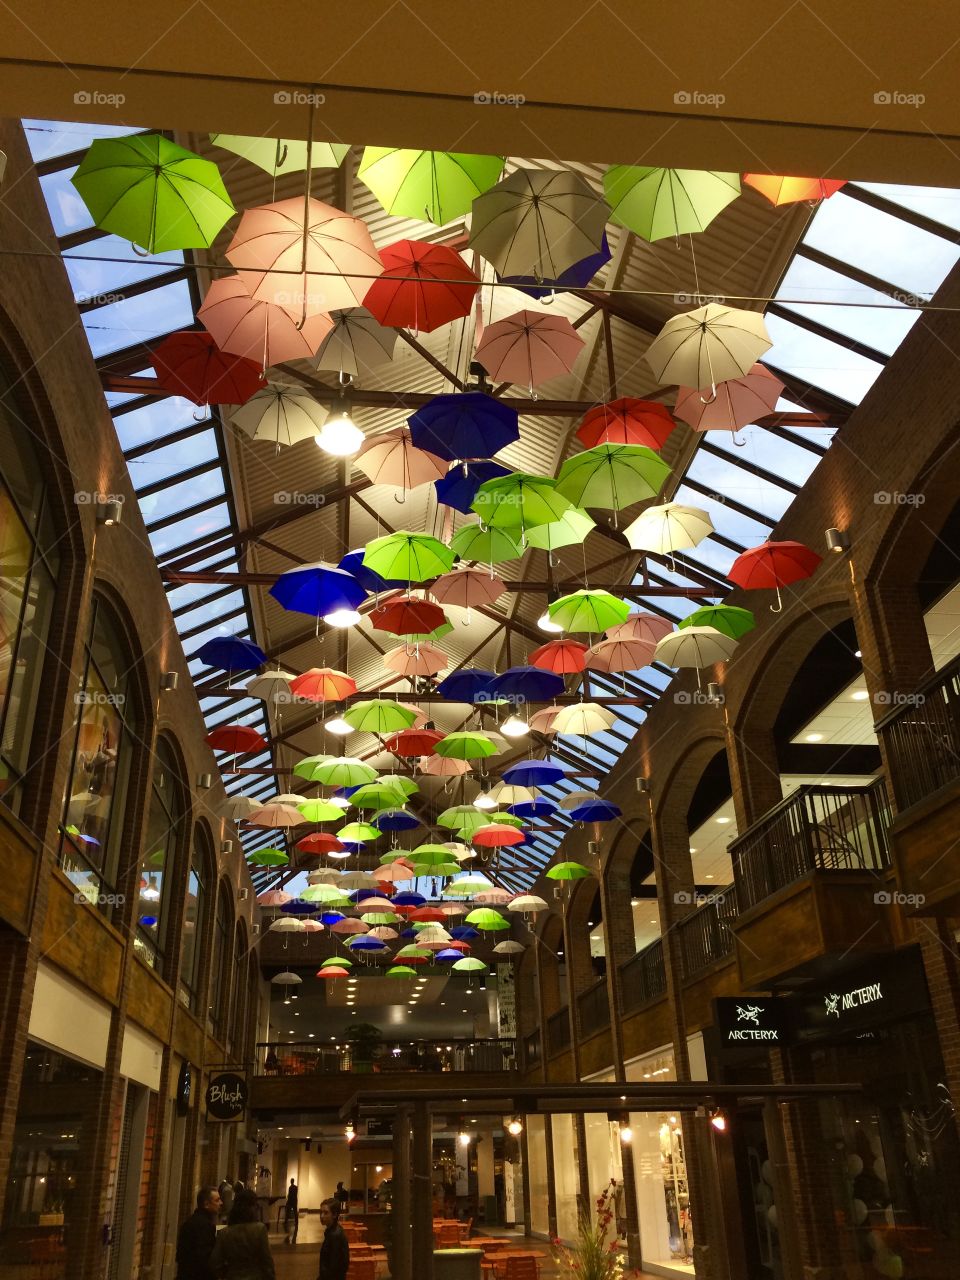 Creative display of umbrellas floating from the ceiling of a shopping center in Minneapolis are highlighted with clever use of lighting.